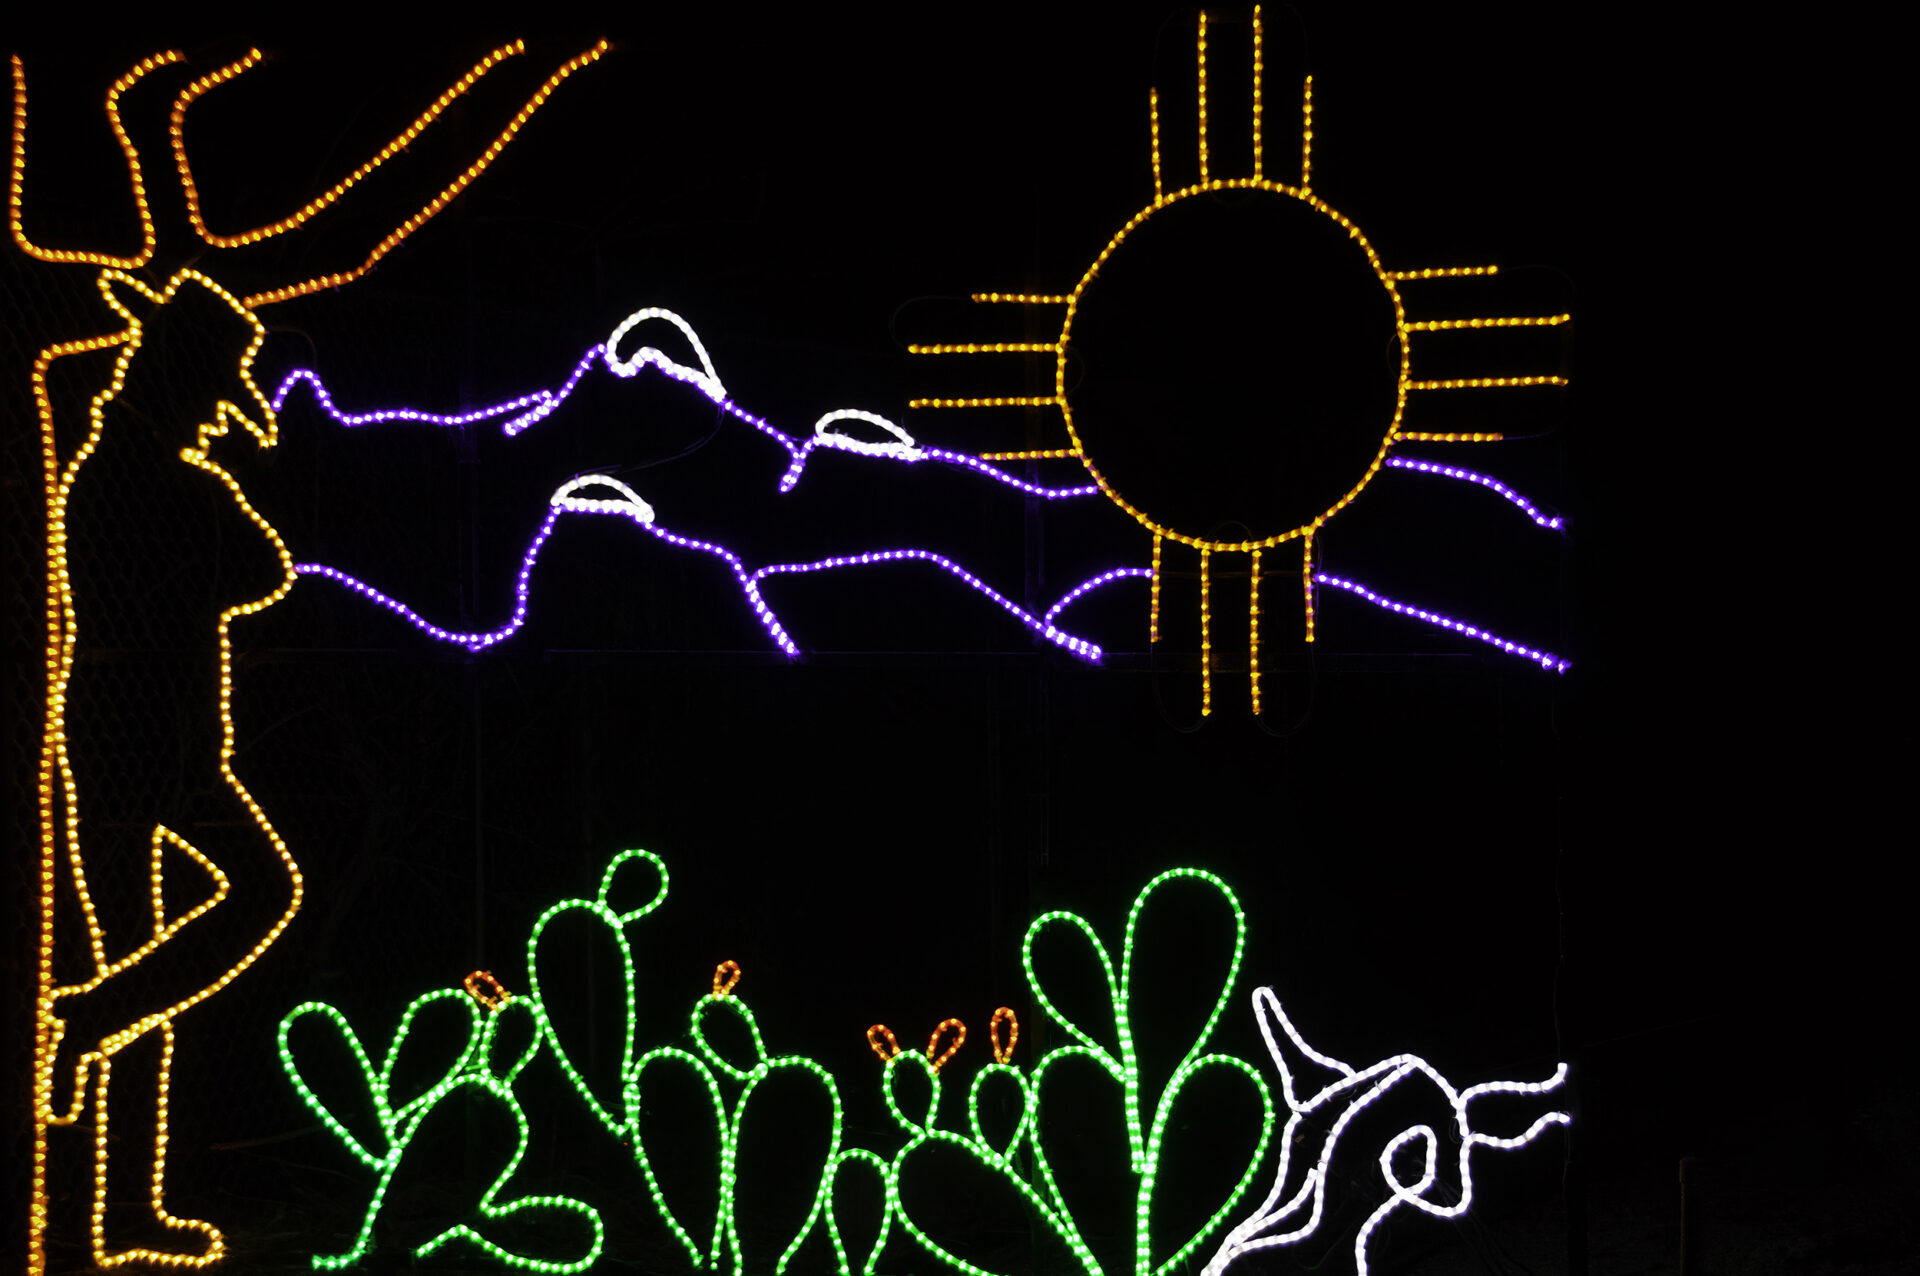 Lights forming a cowboy and a desert scenery